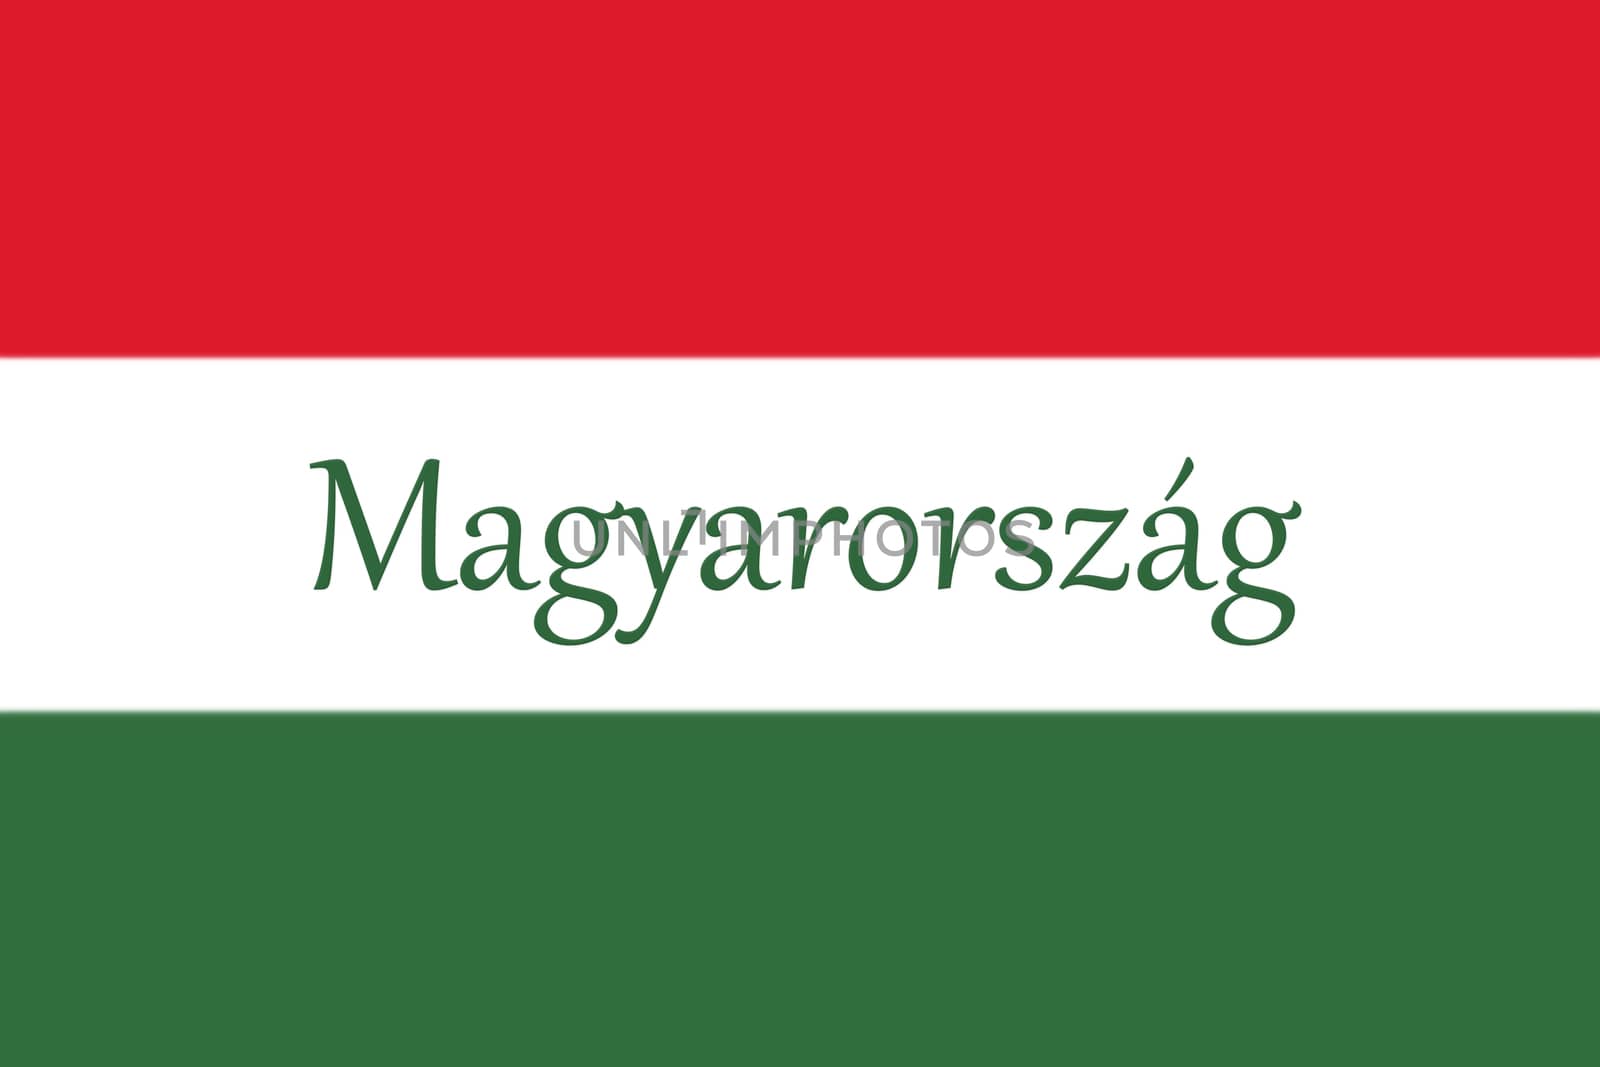 Hungarian National Flag With Hungary Written On It 3D illustration 